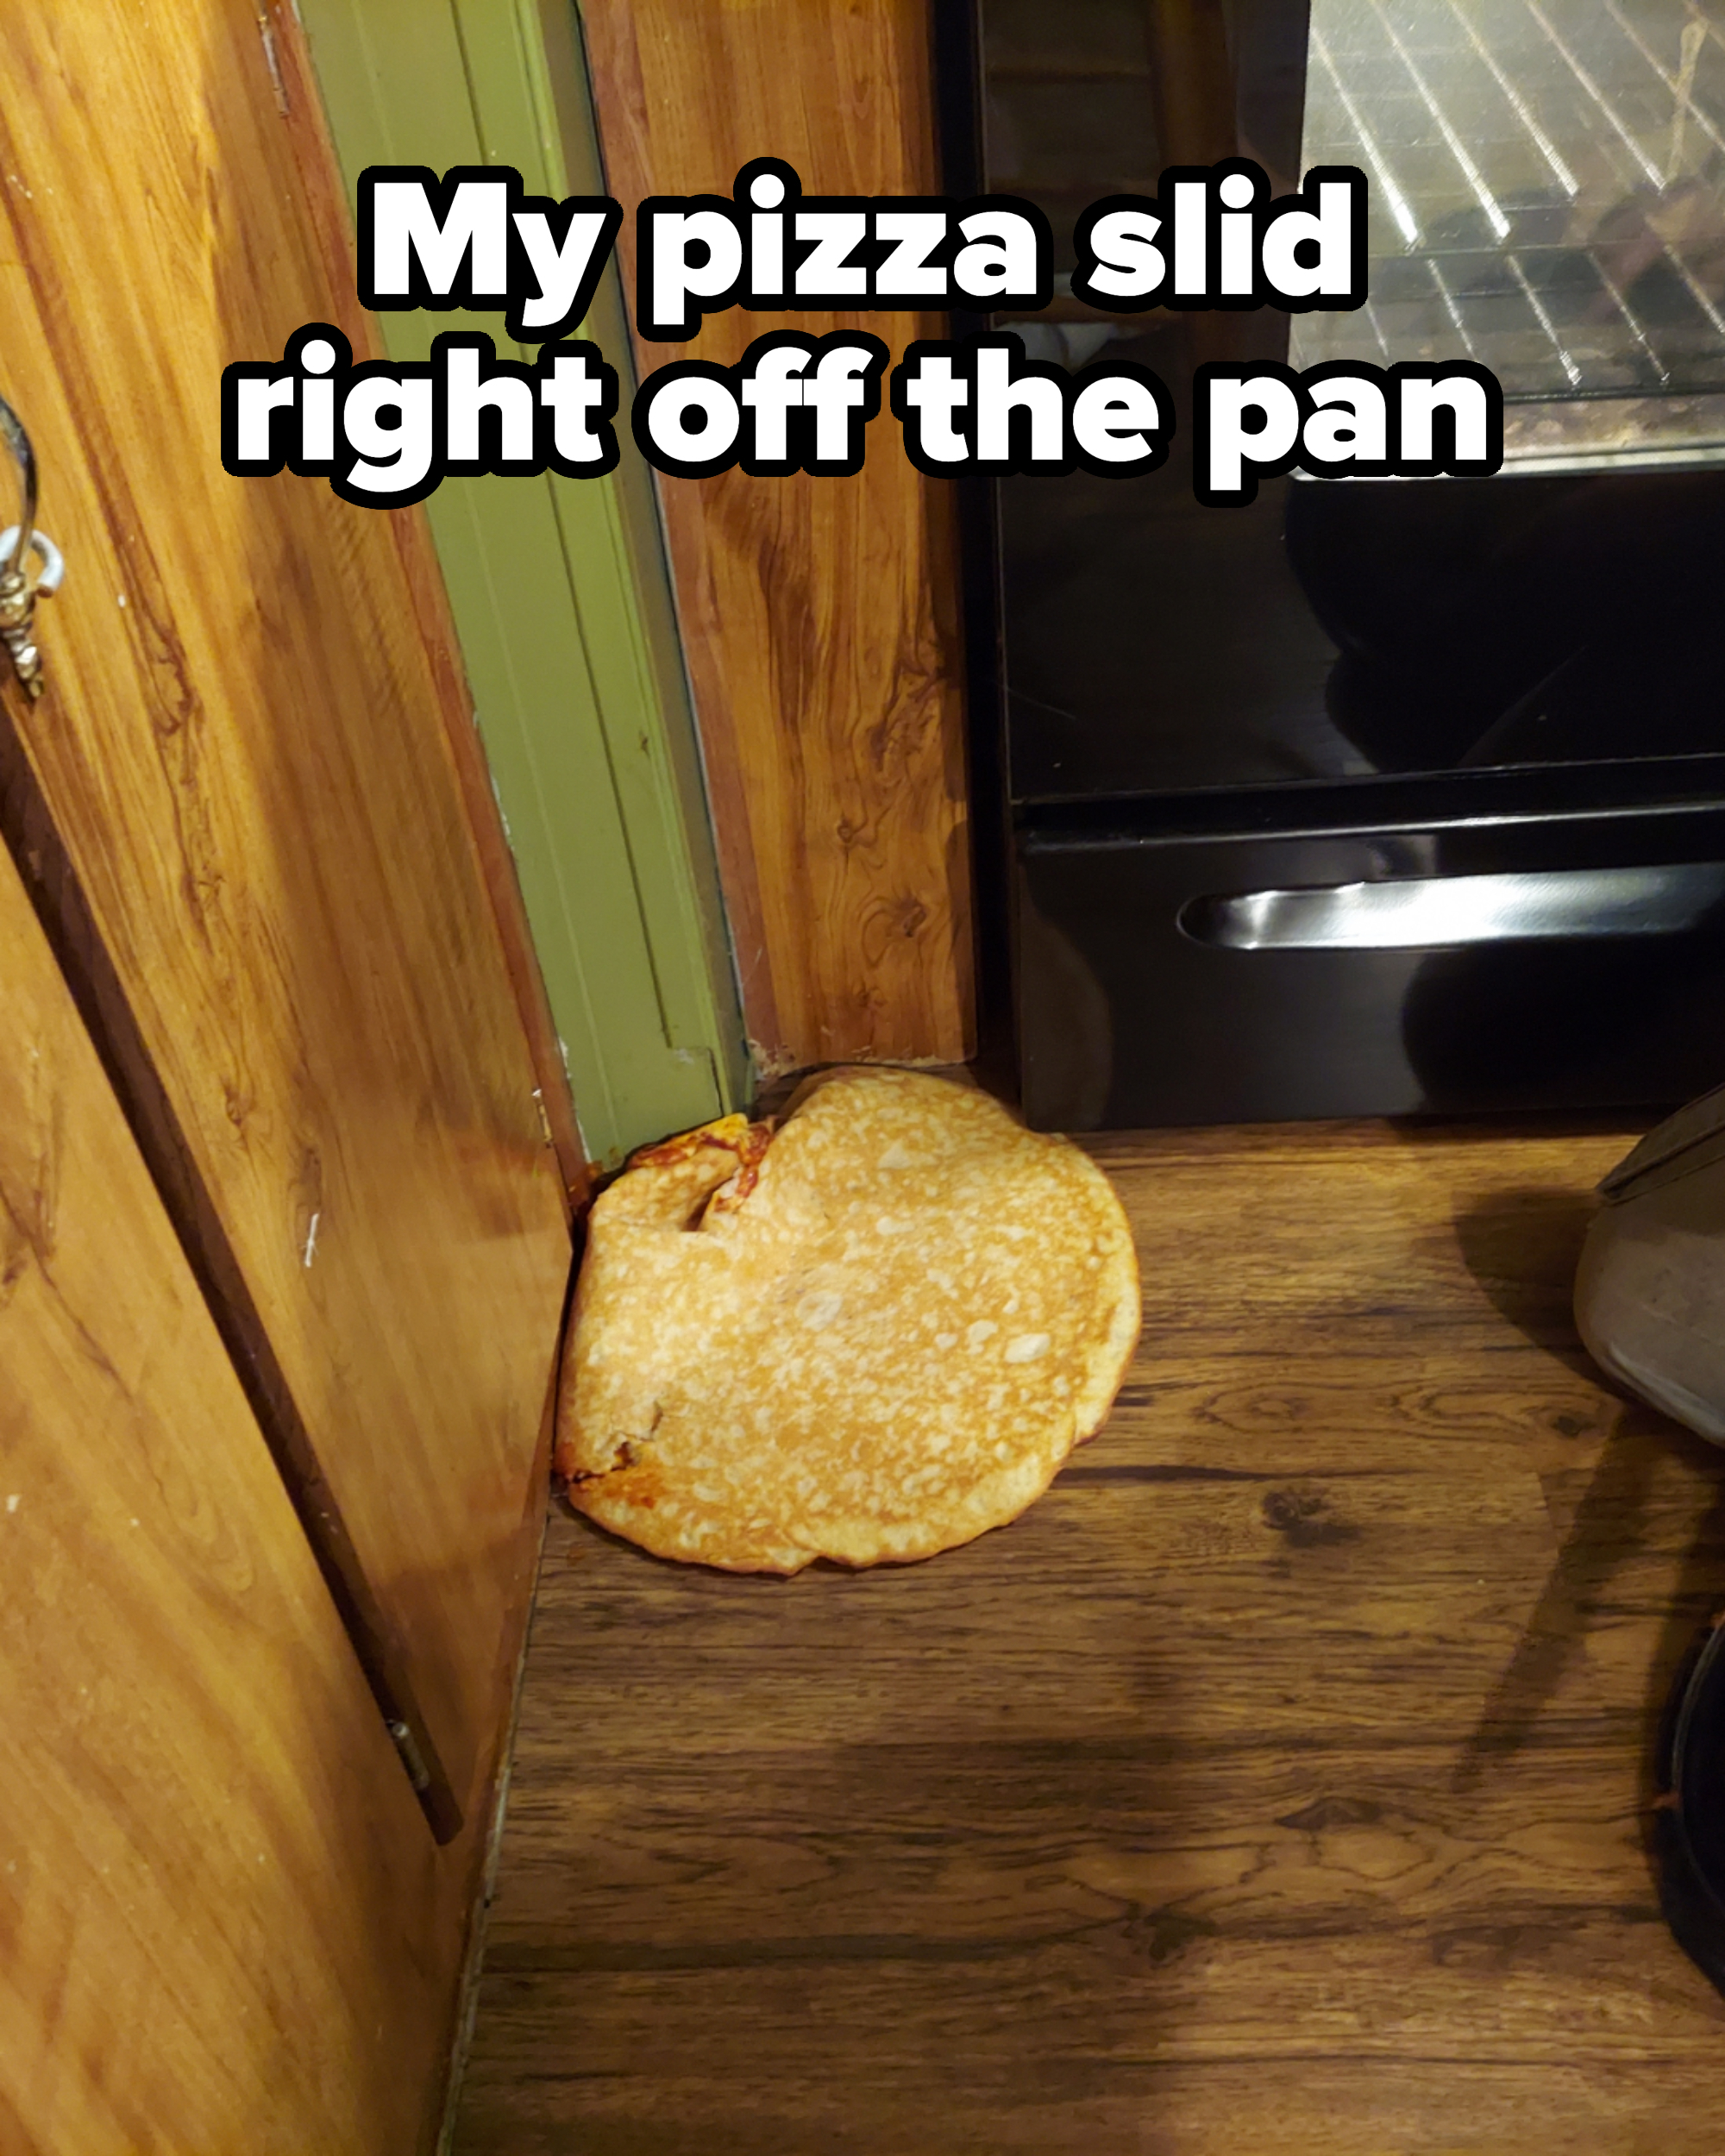 Pizza on the floor in front of an oven, with caption, &quot;My pizza slid right off the pan&quot;